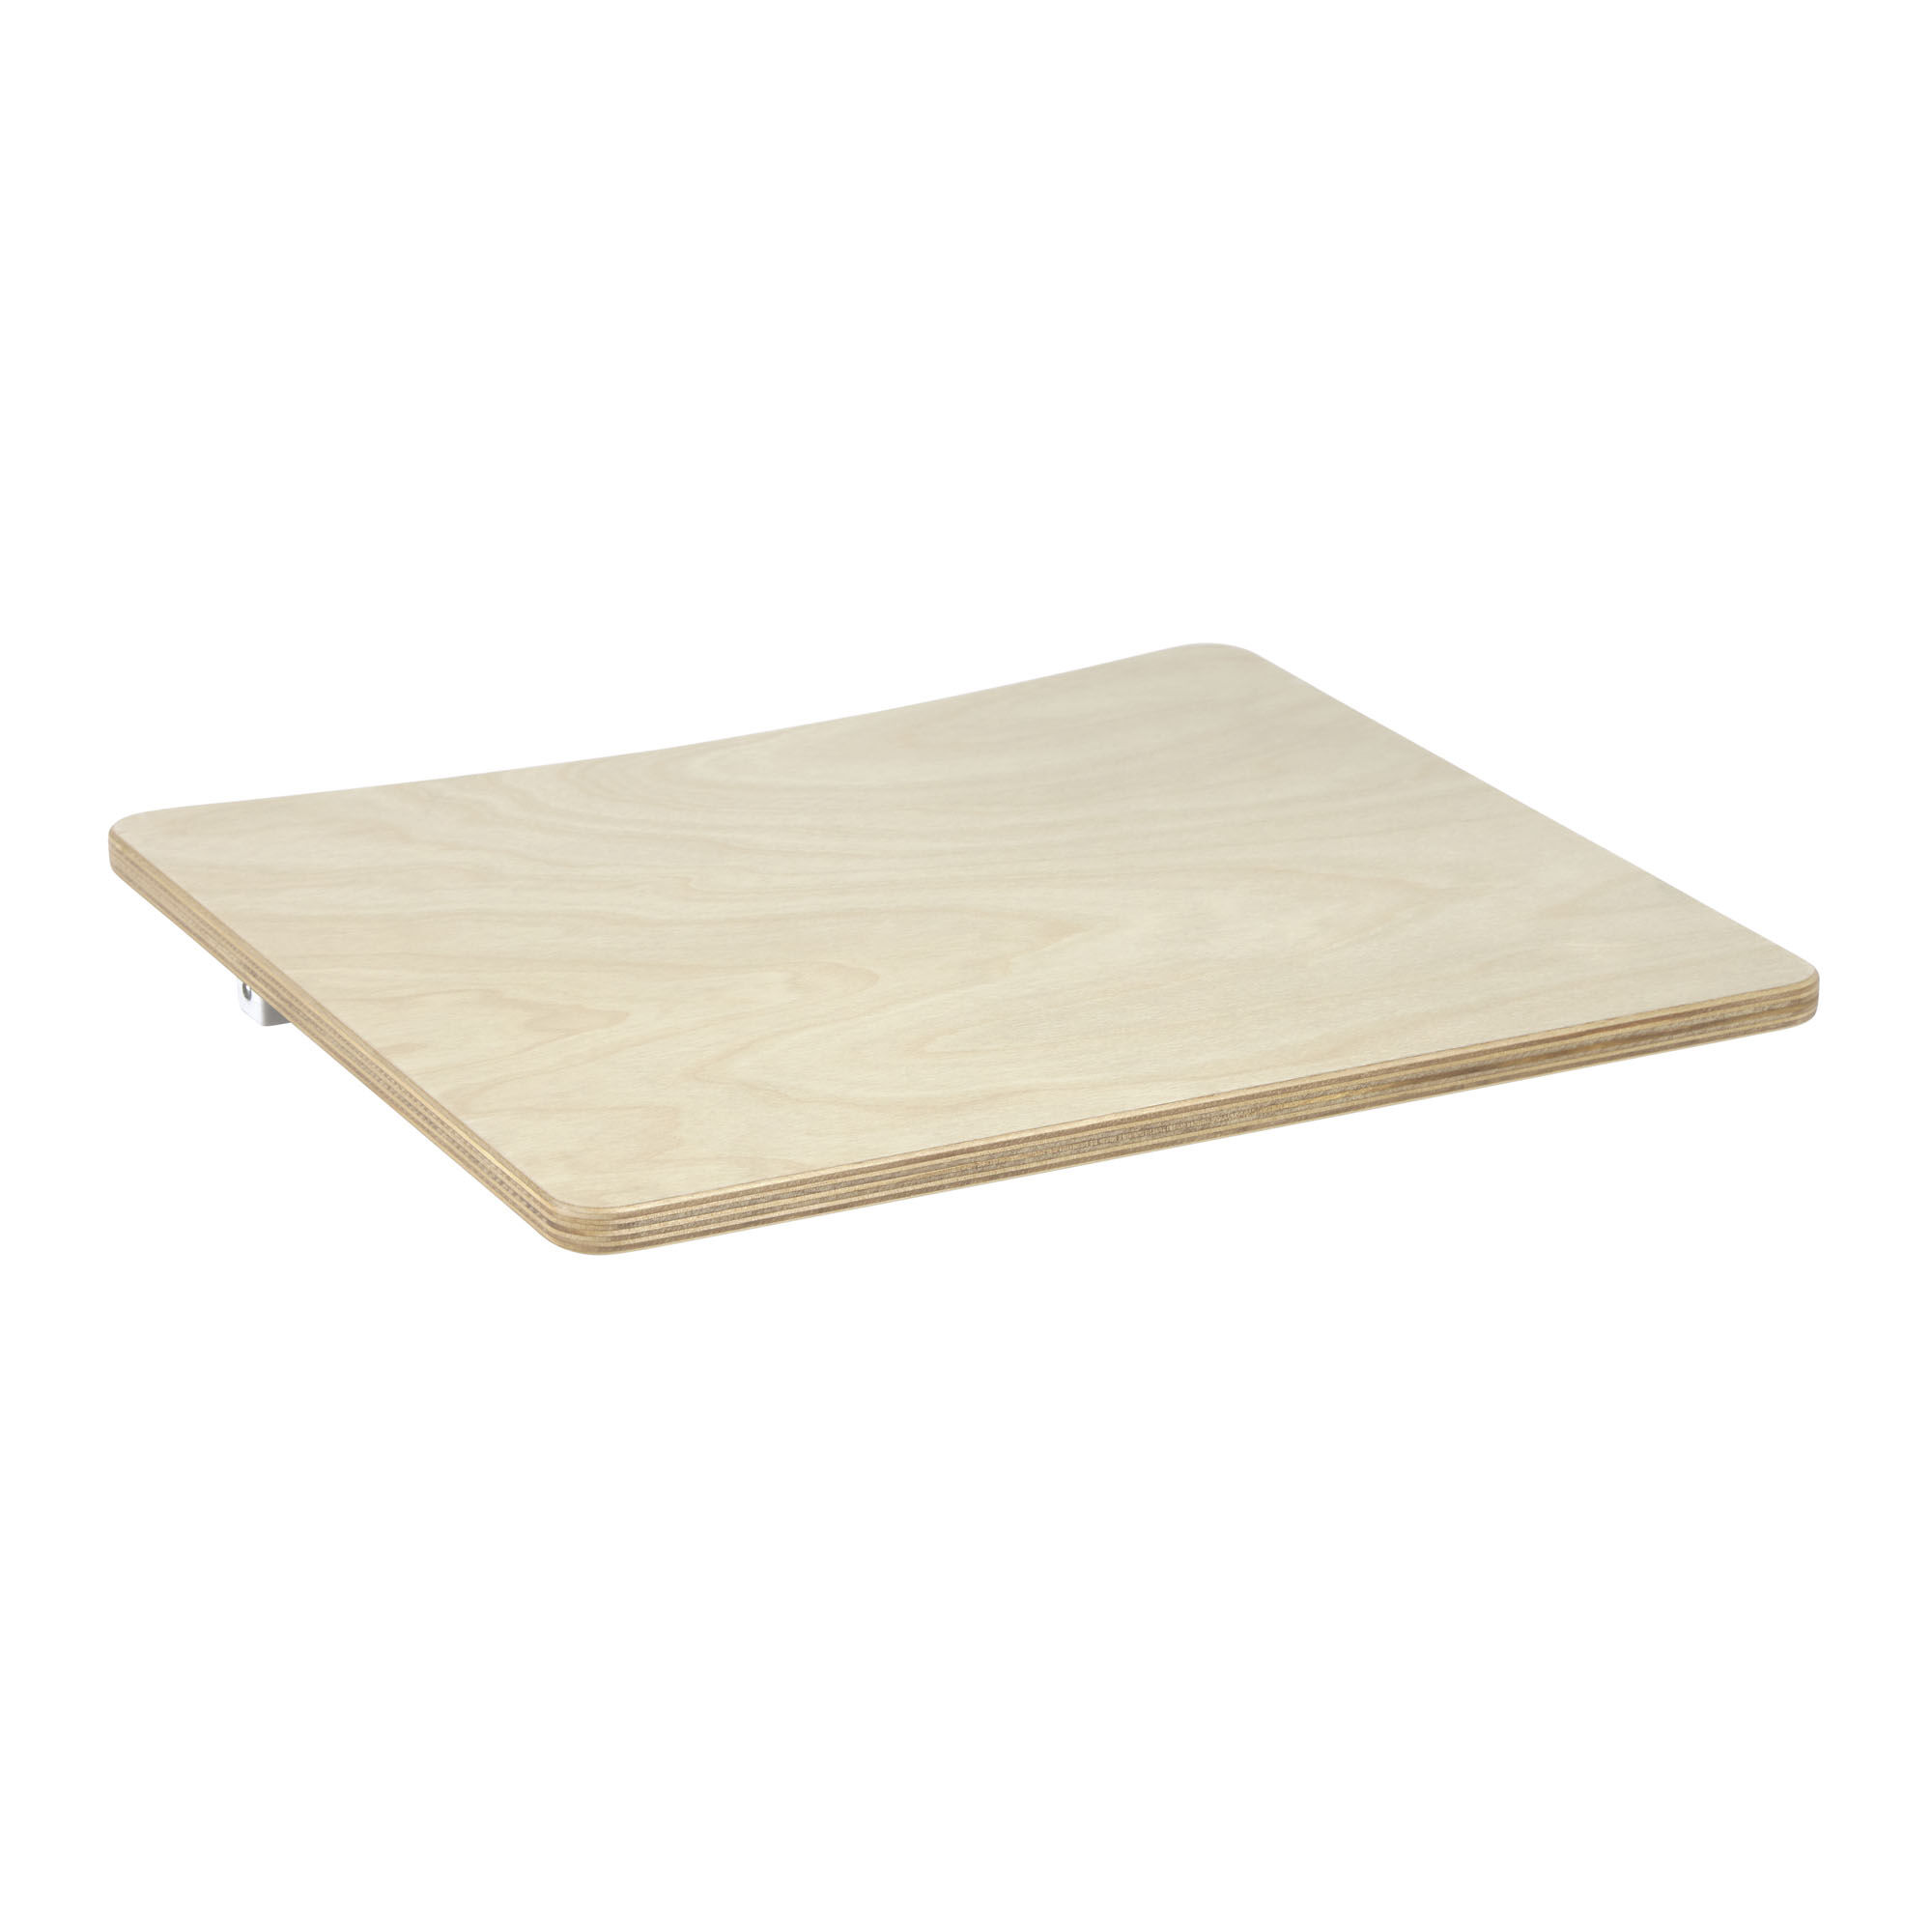 Kave Home Tray for the Nuun evolutive chair in birch veneer